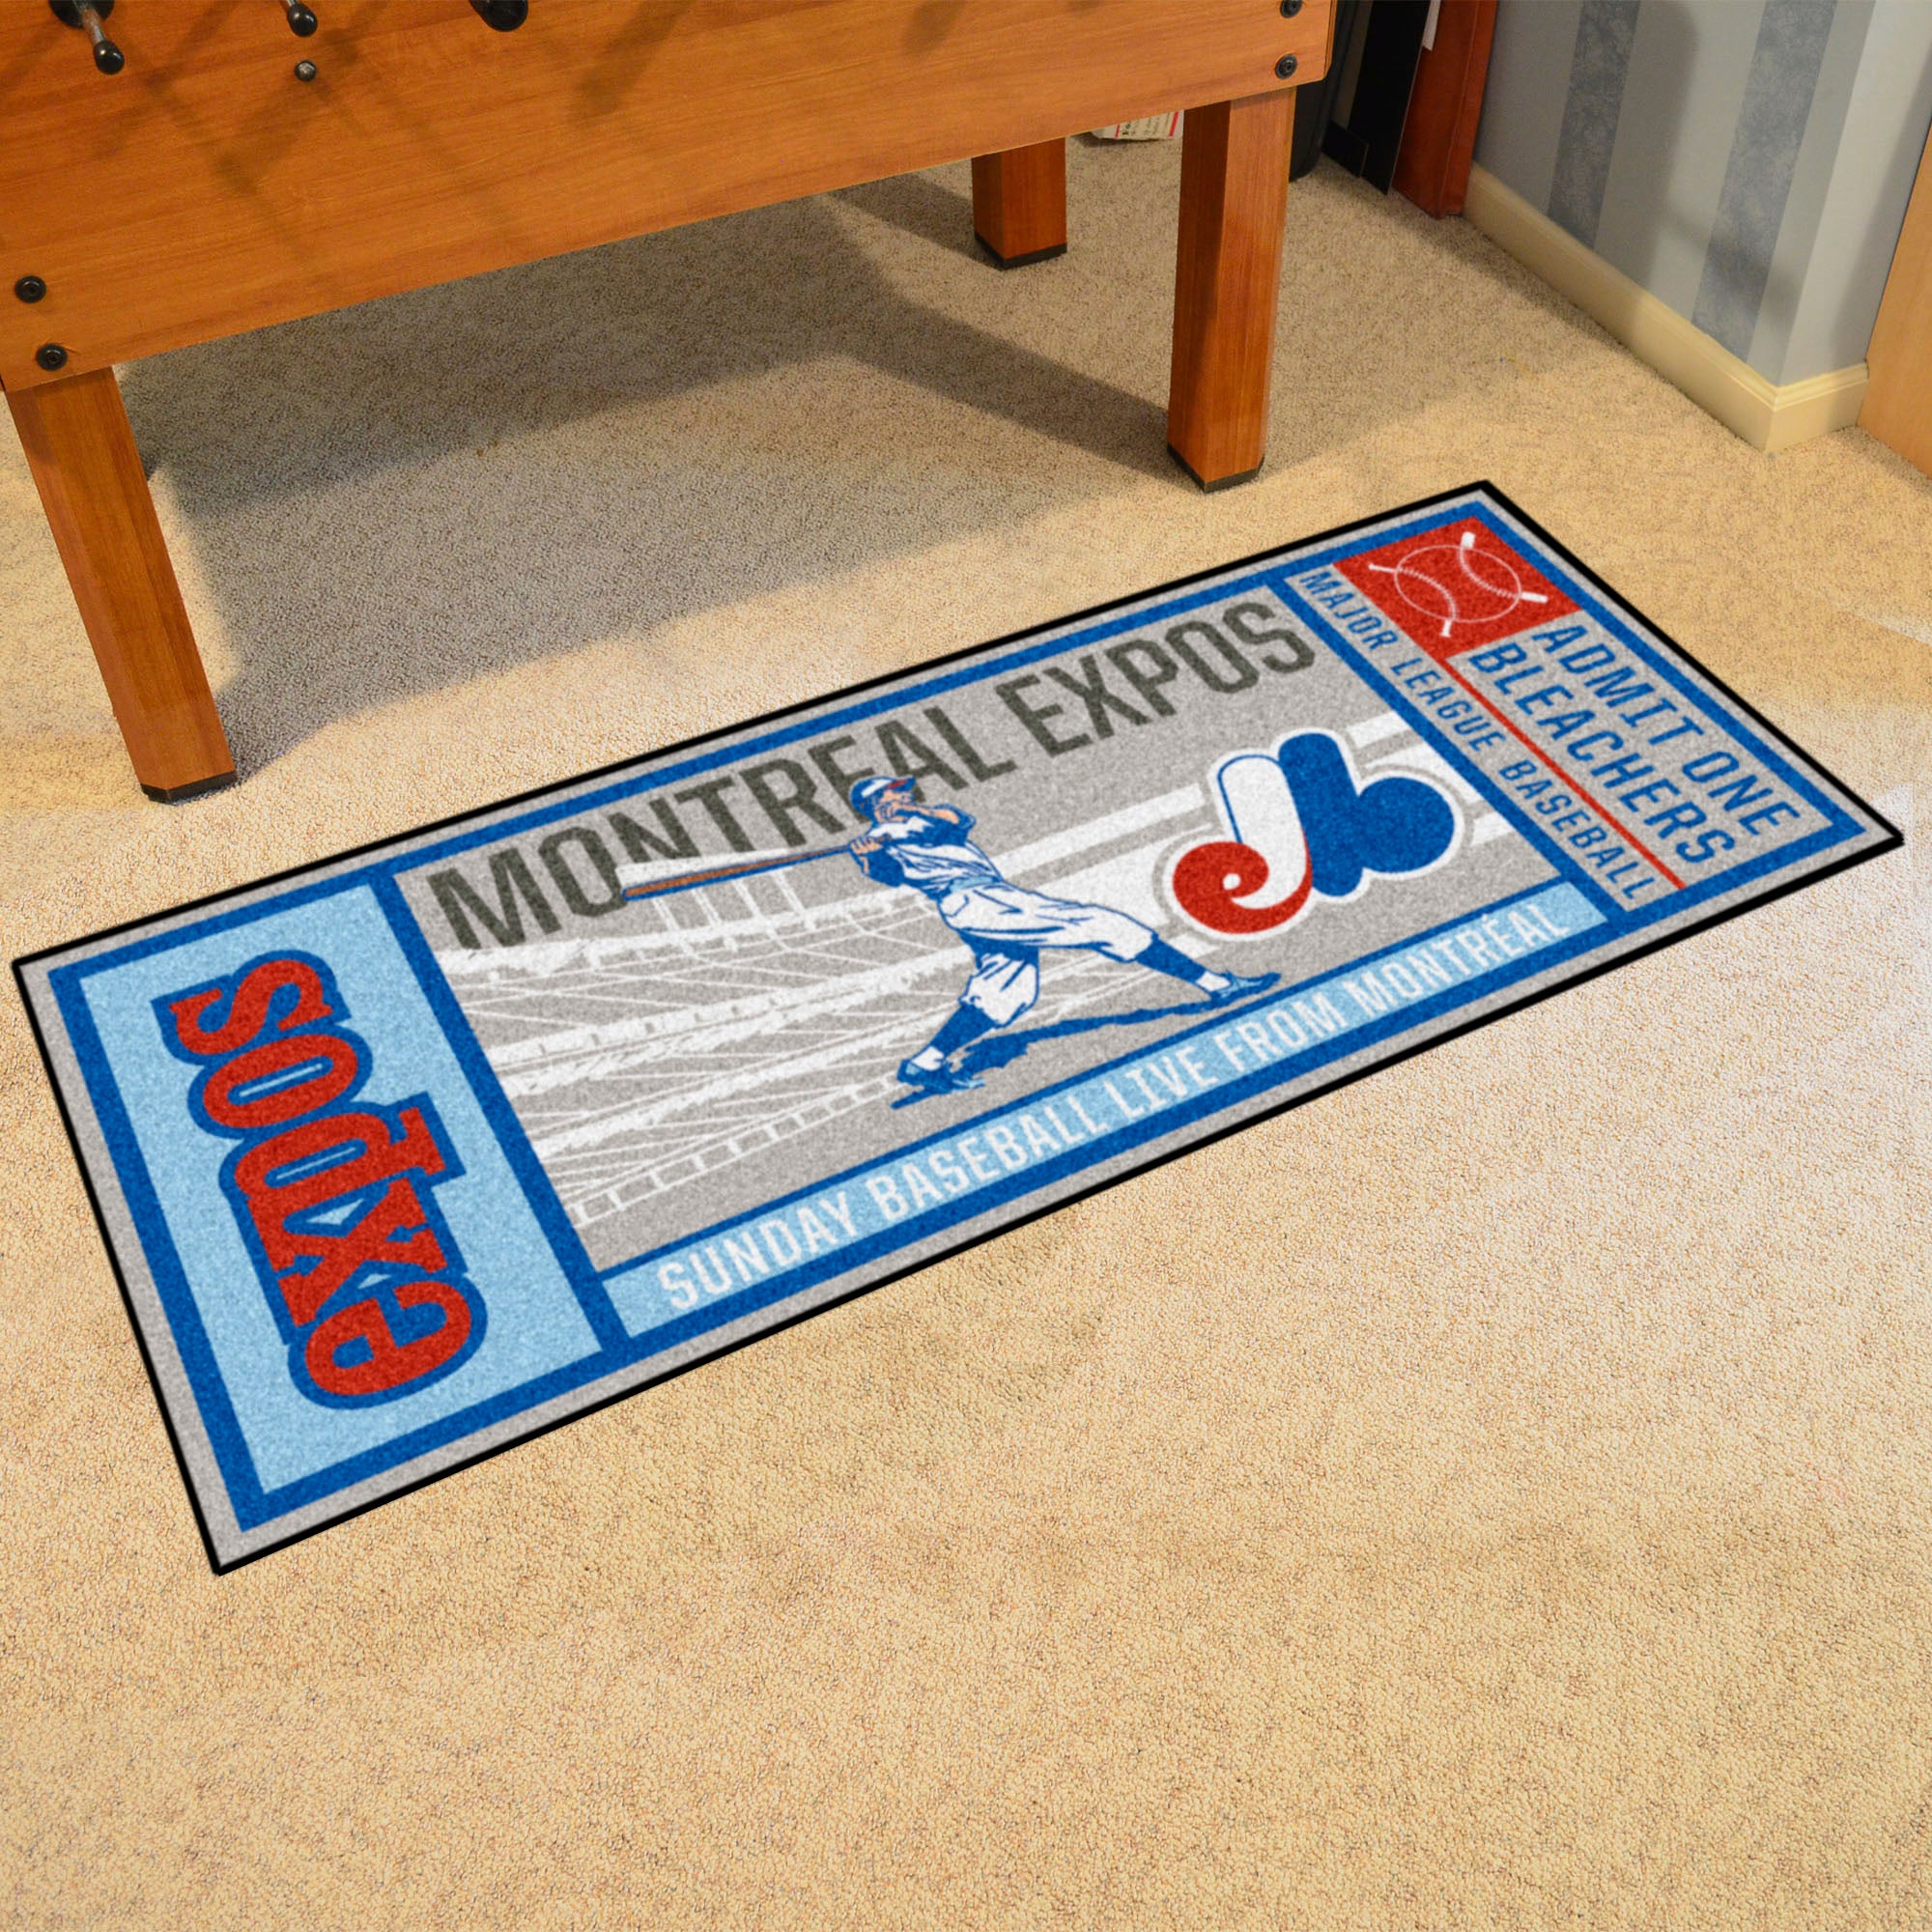 FANMATS, MLB - Washington Nationals Retro Collection Ticket Runner Rug - 30in. x 72in. - (1990 Montreal Expos)